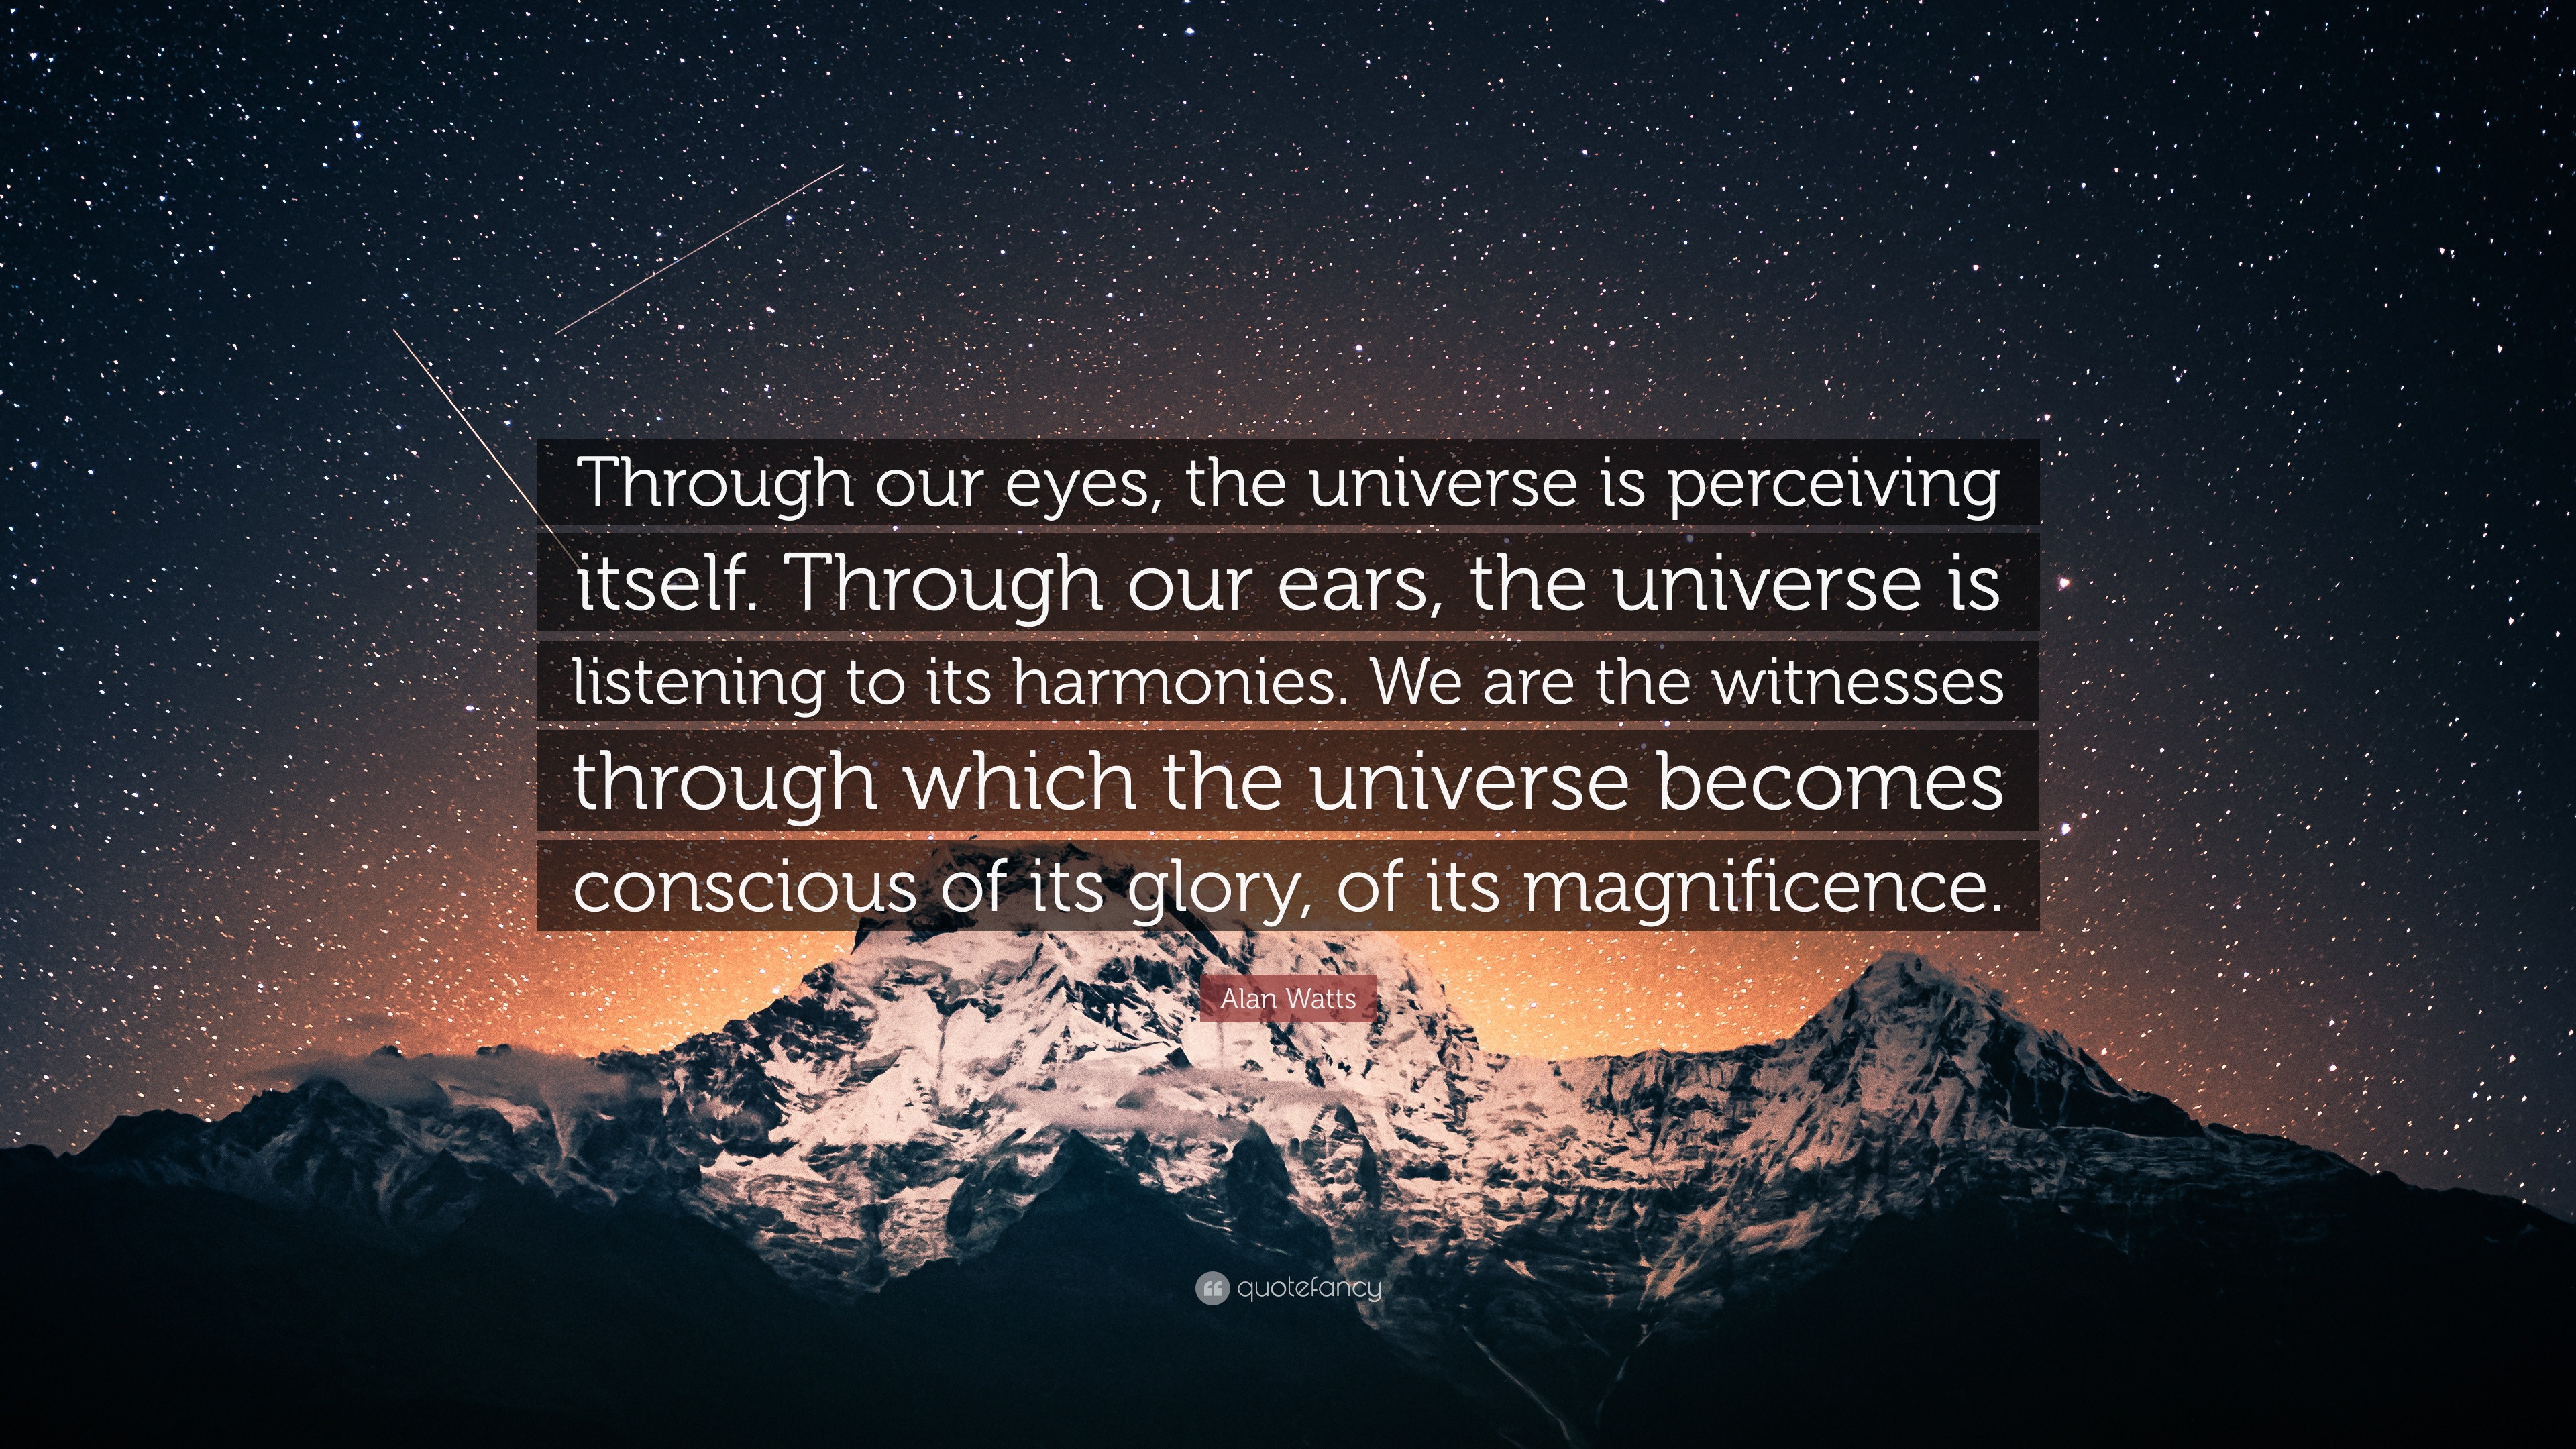 Alan Watts Quote: “Through our eyes, the universe is perceiving itself ...